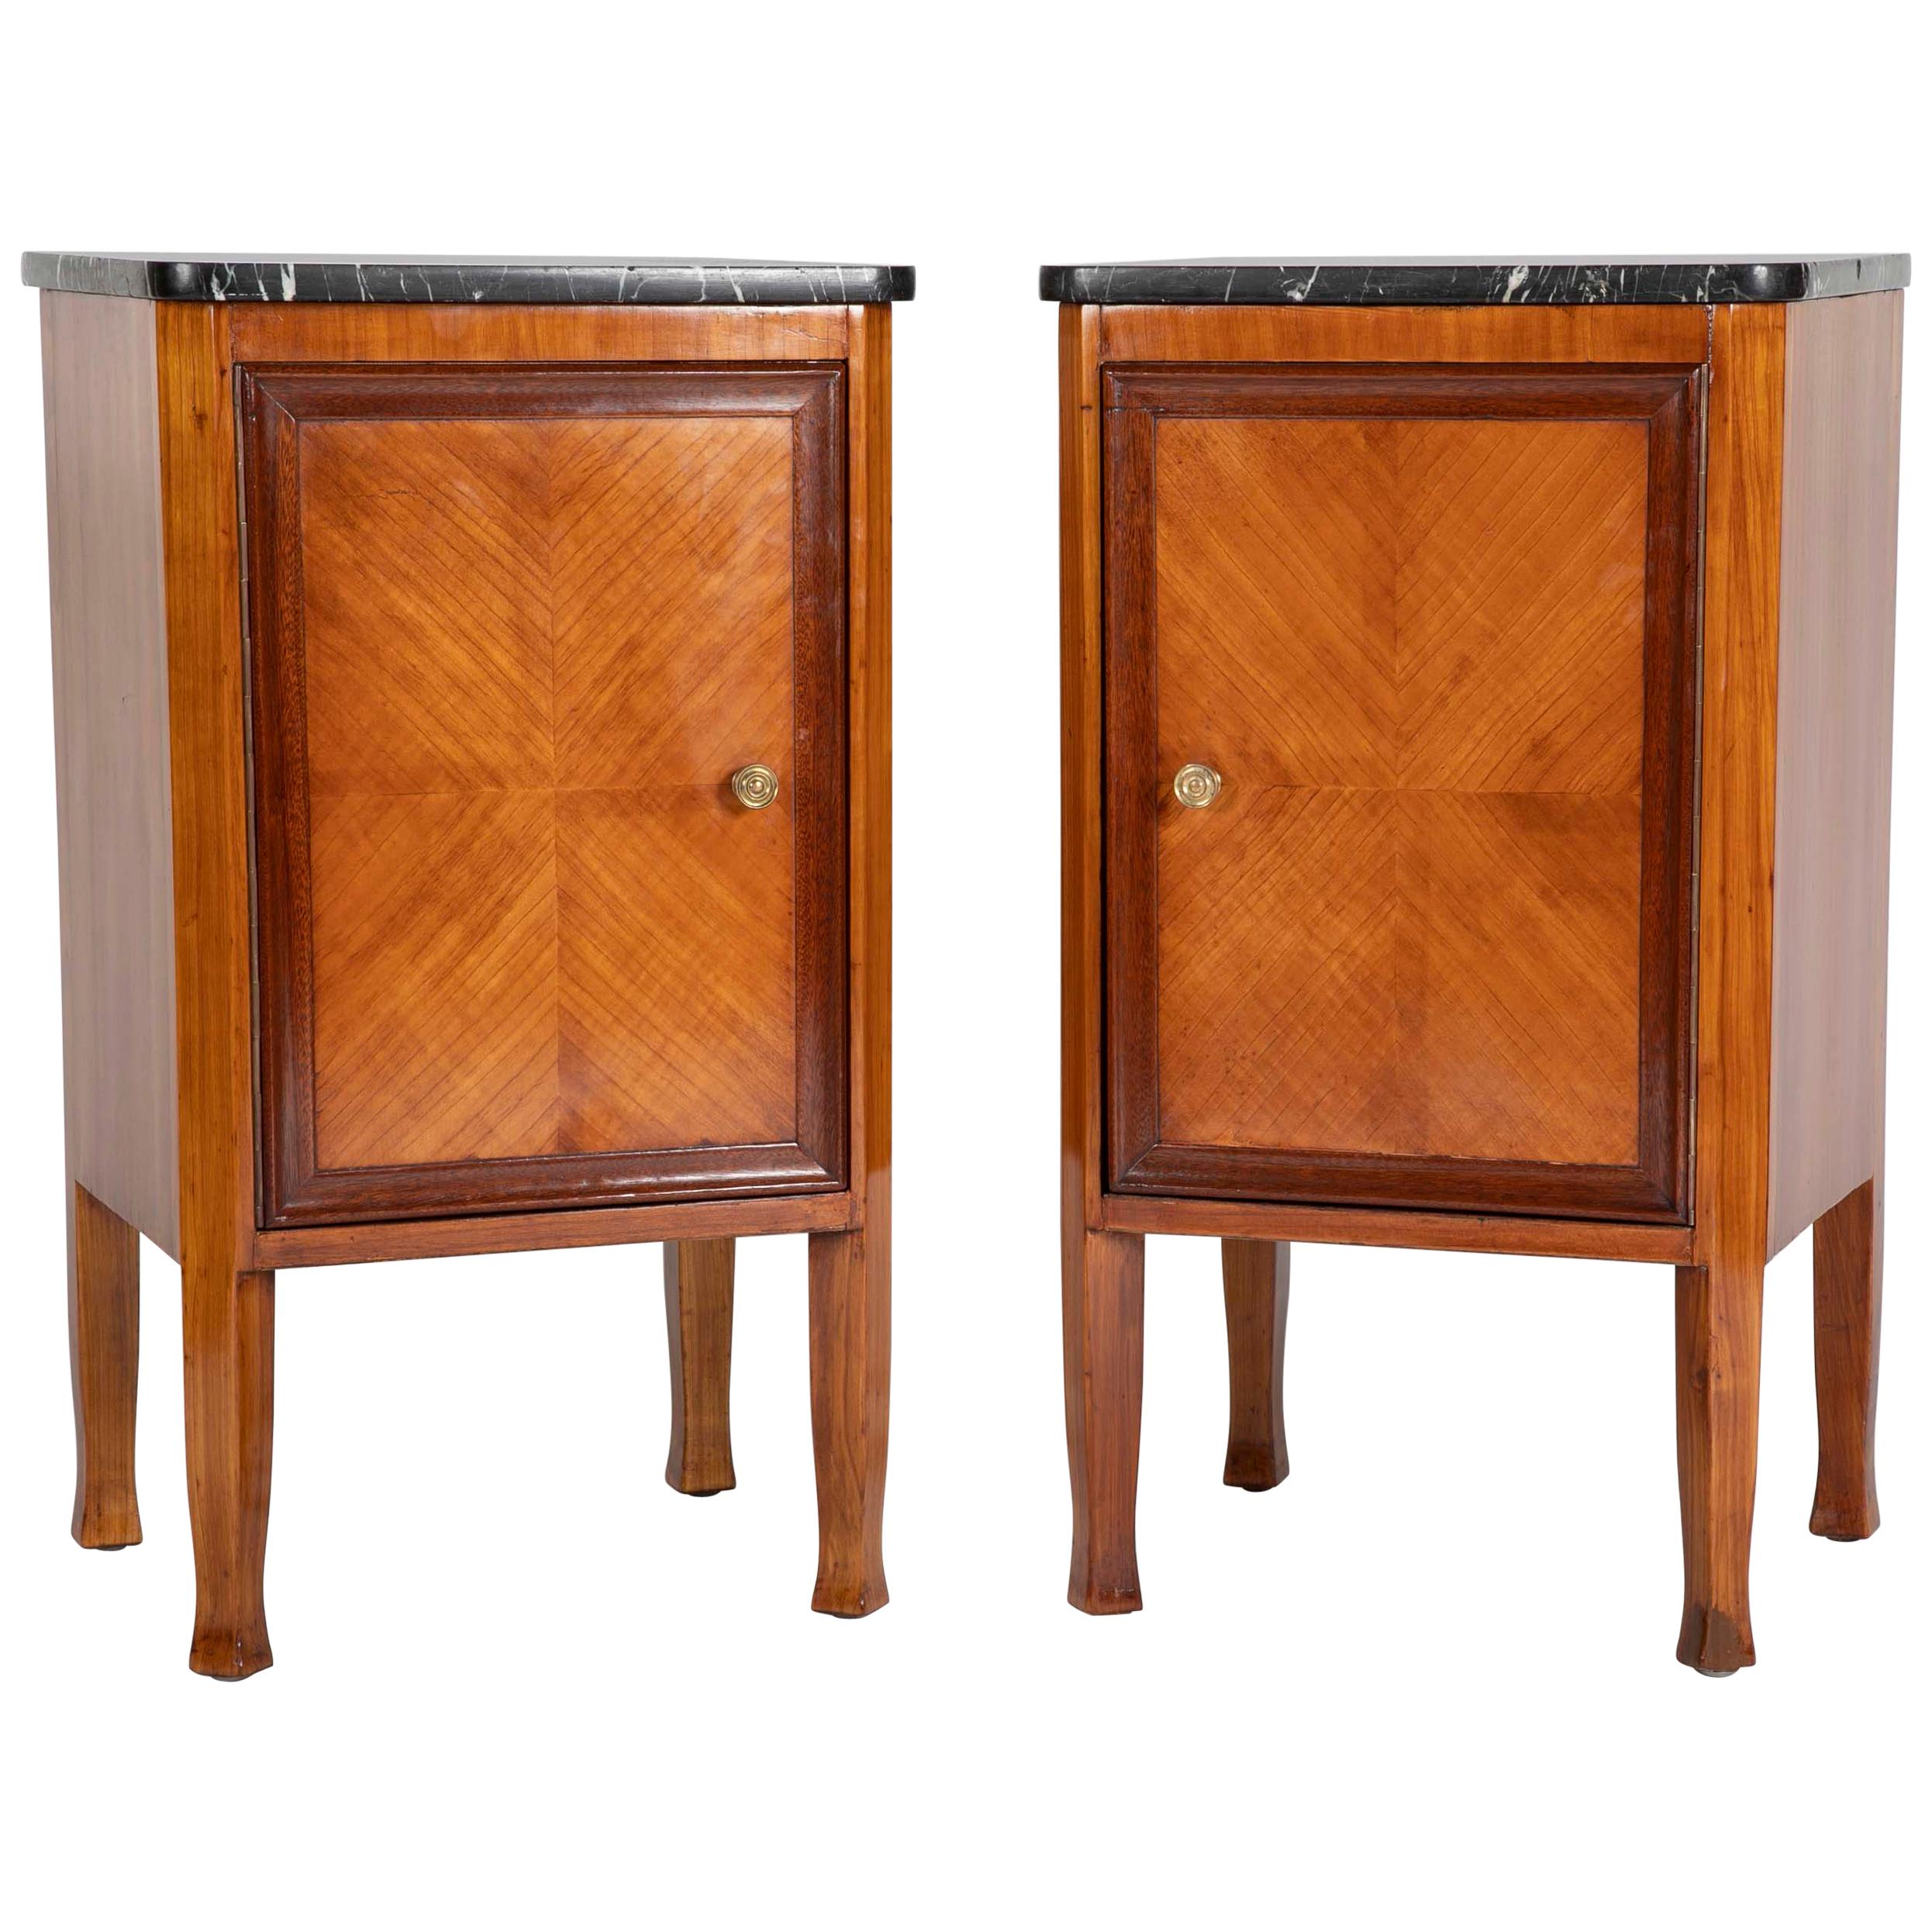 Pair of Italian Fruit Wood Bedside Cabinets